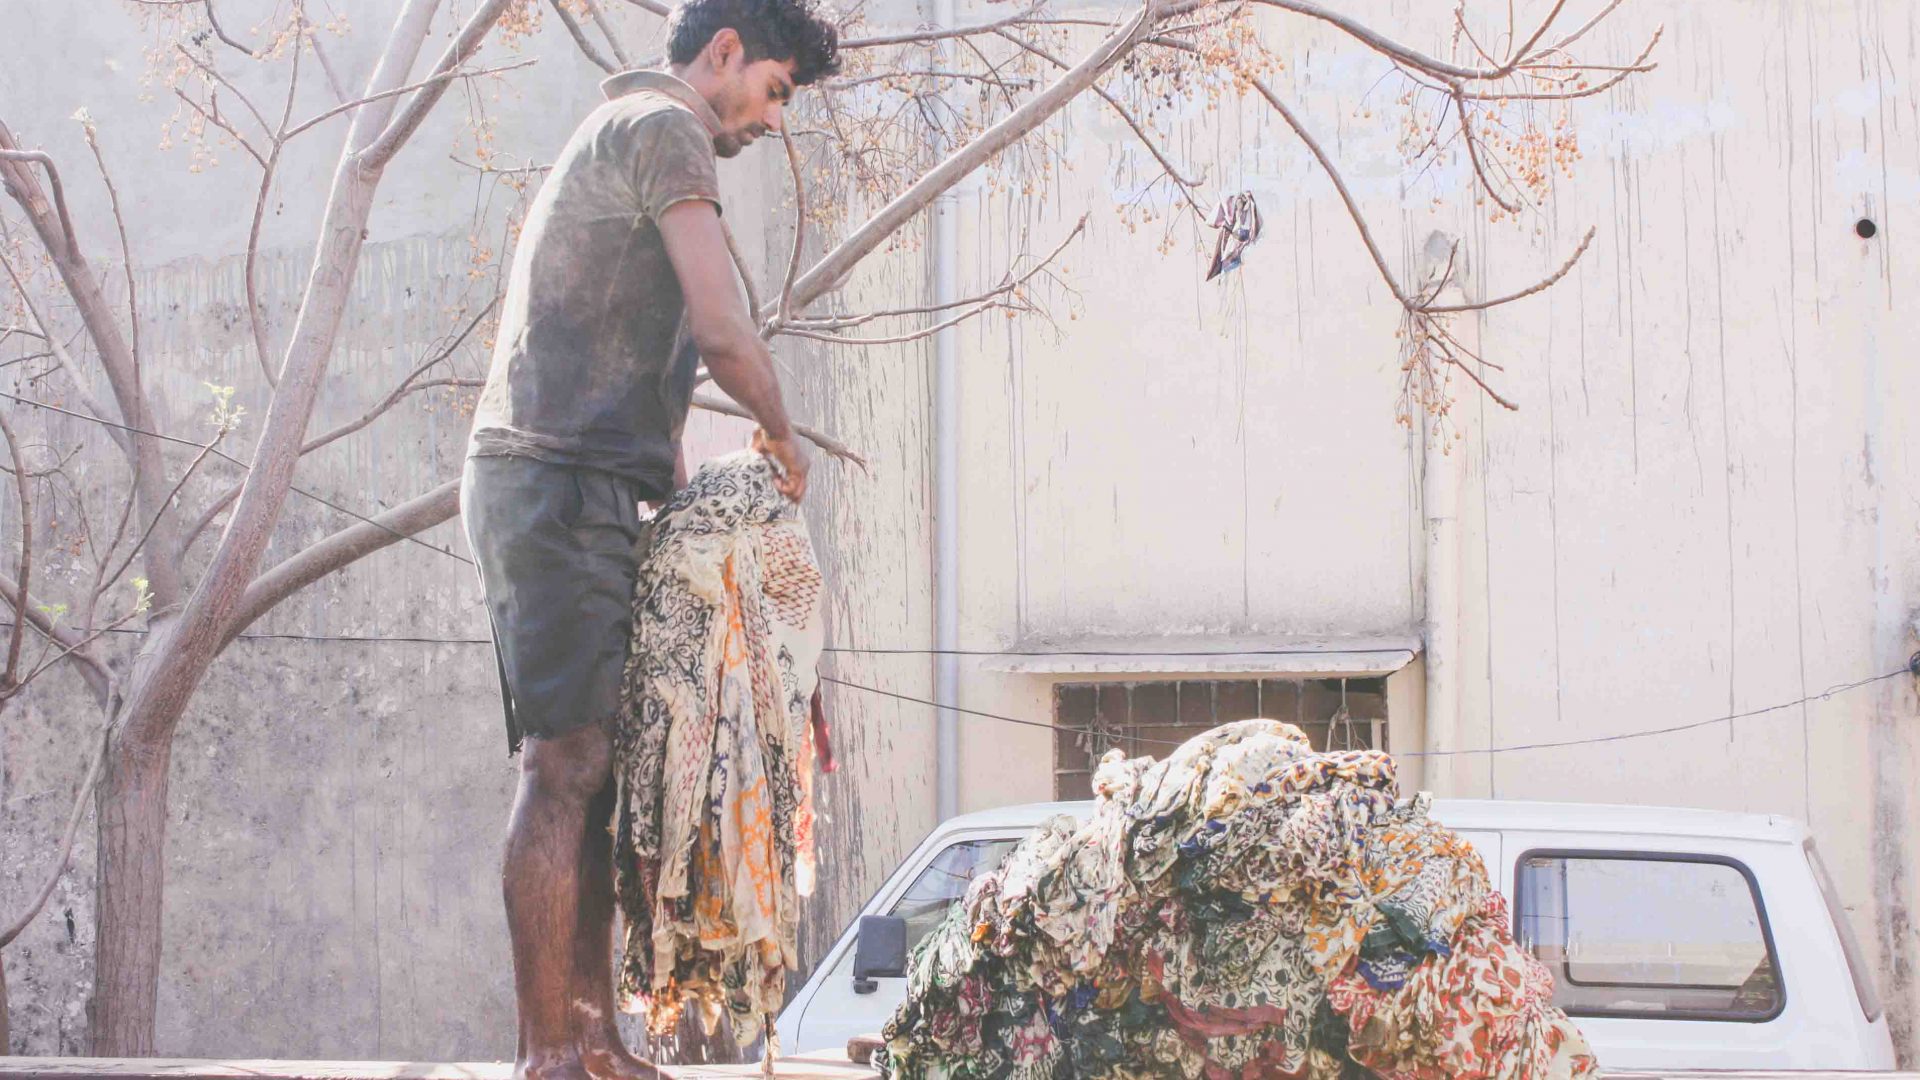 A local dobhi/washer rinses fabrics at Bagru's washing compound in Rajasthan, India.